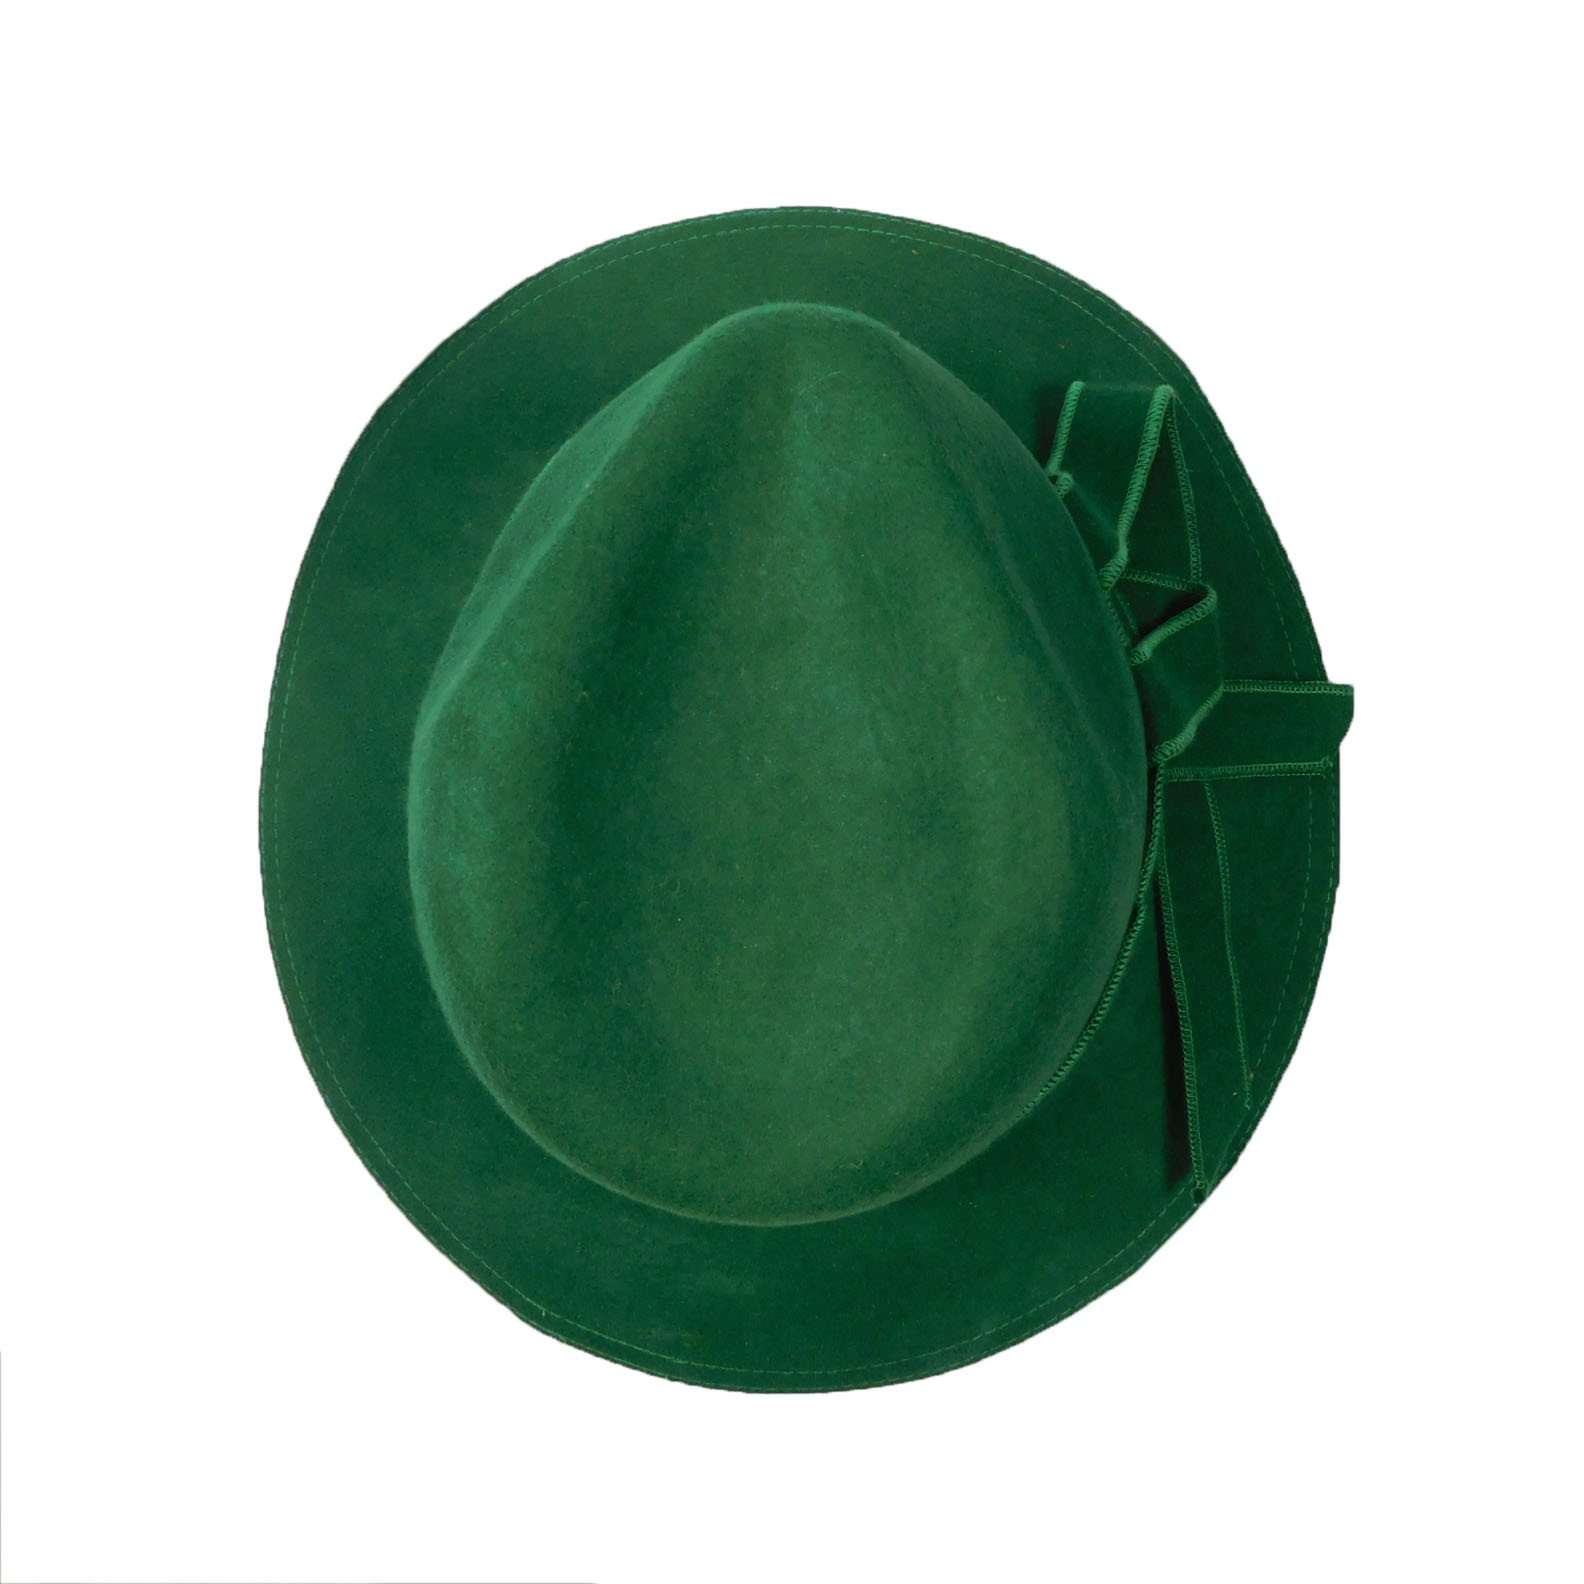 Floppy Fedora Hat, Green and Navy Fedora Hat Jeanne Simmons    